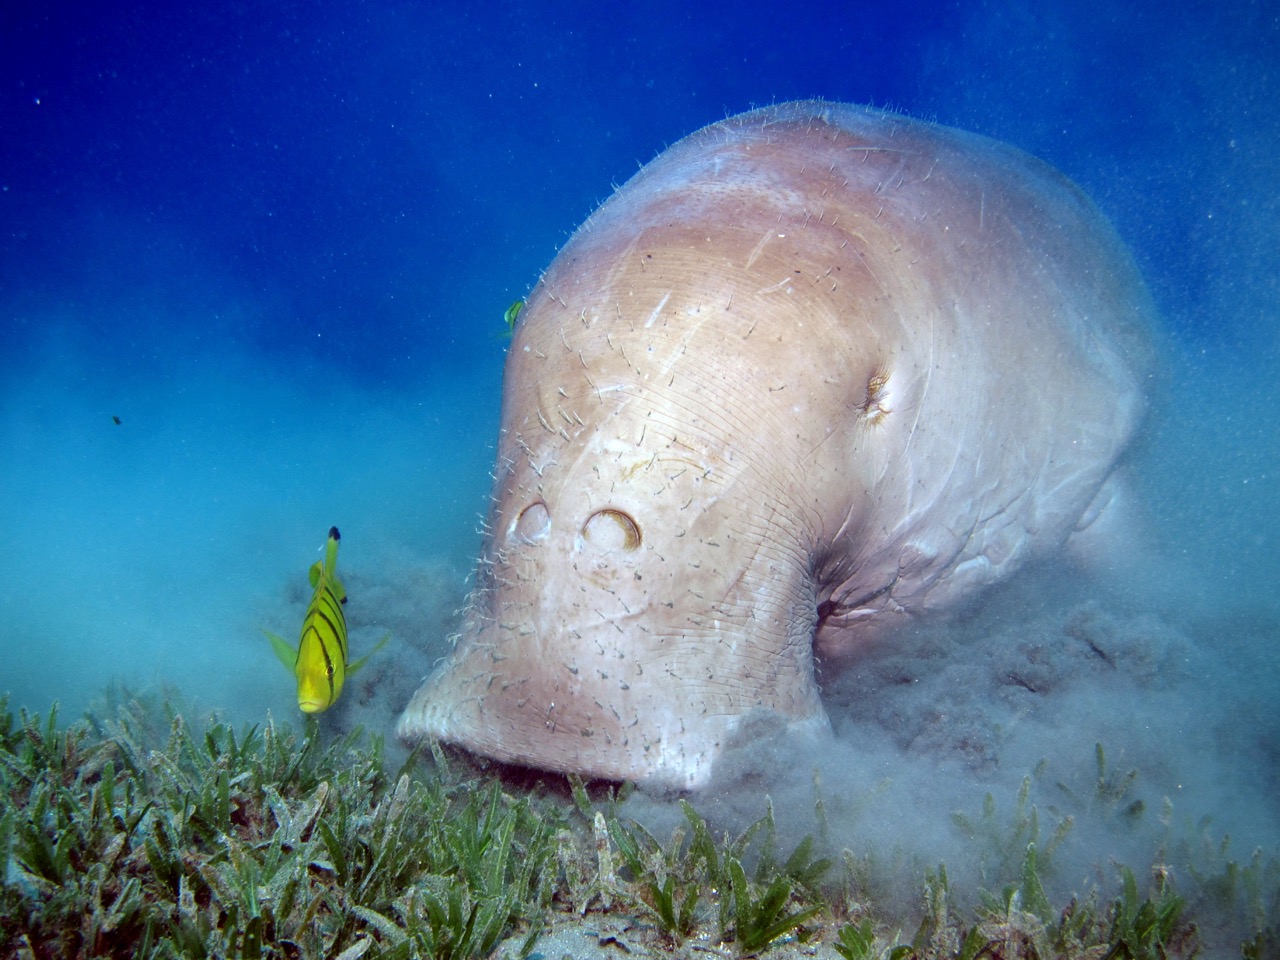 Dugong spotted while diving in Marsa Alam, Egypt